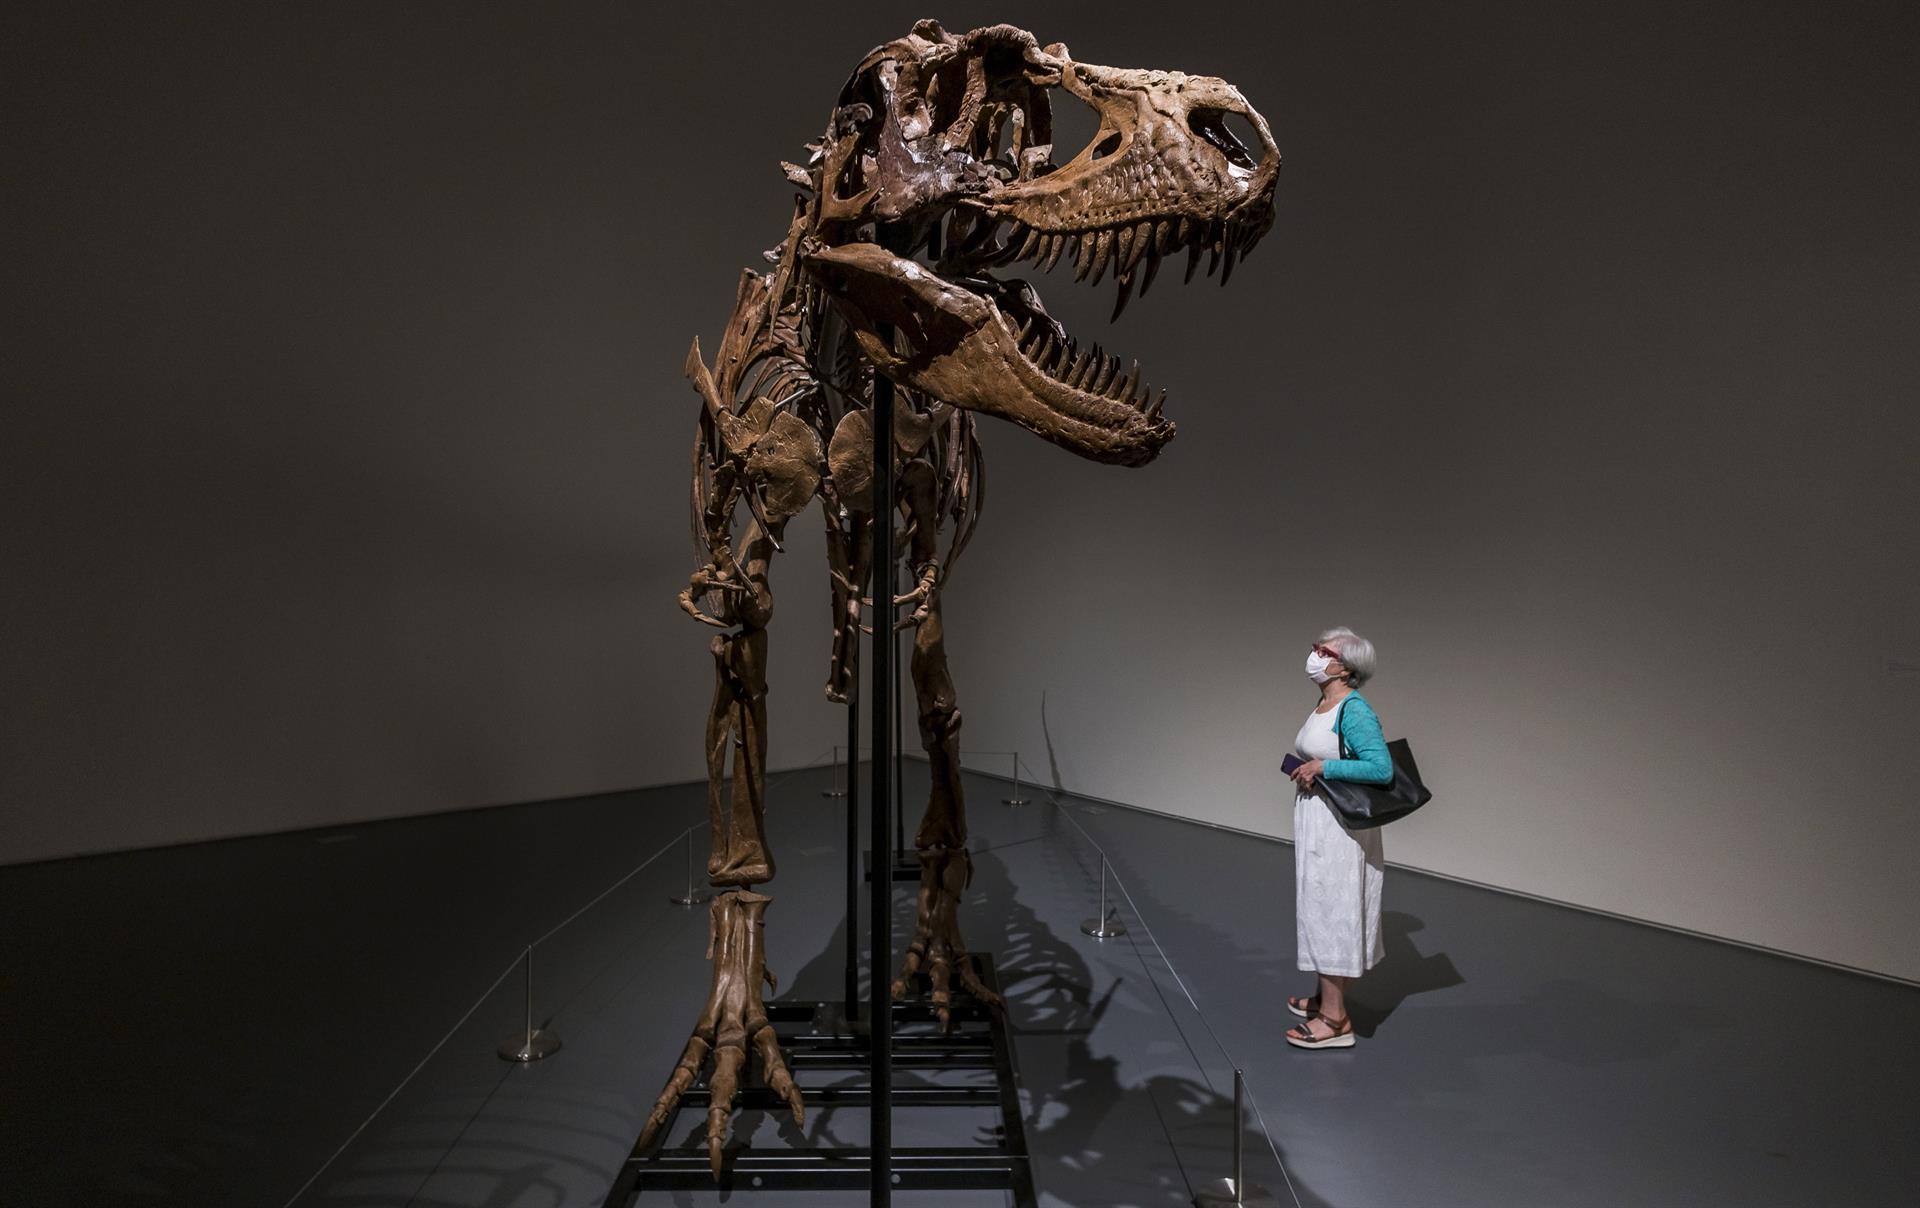 A person looks at a complete Gorgosaurus skeleton that will be auctioned in New York by Sotheby's.